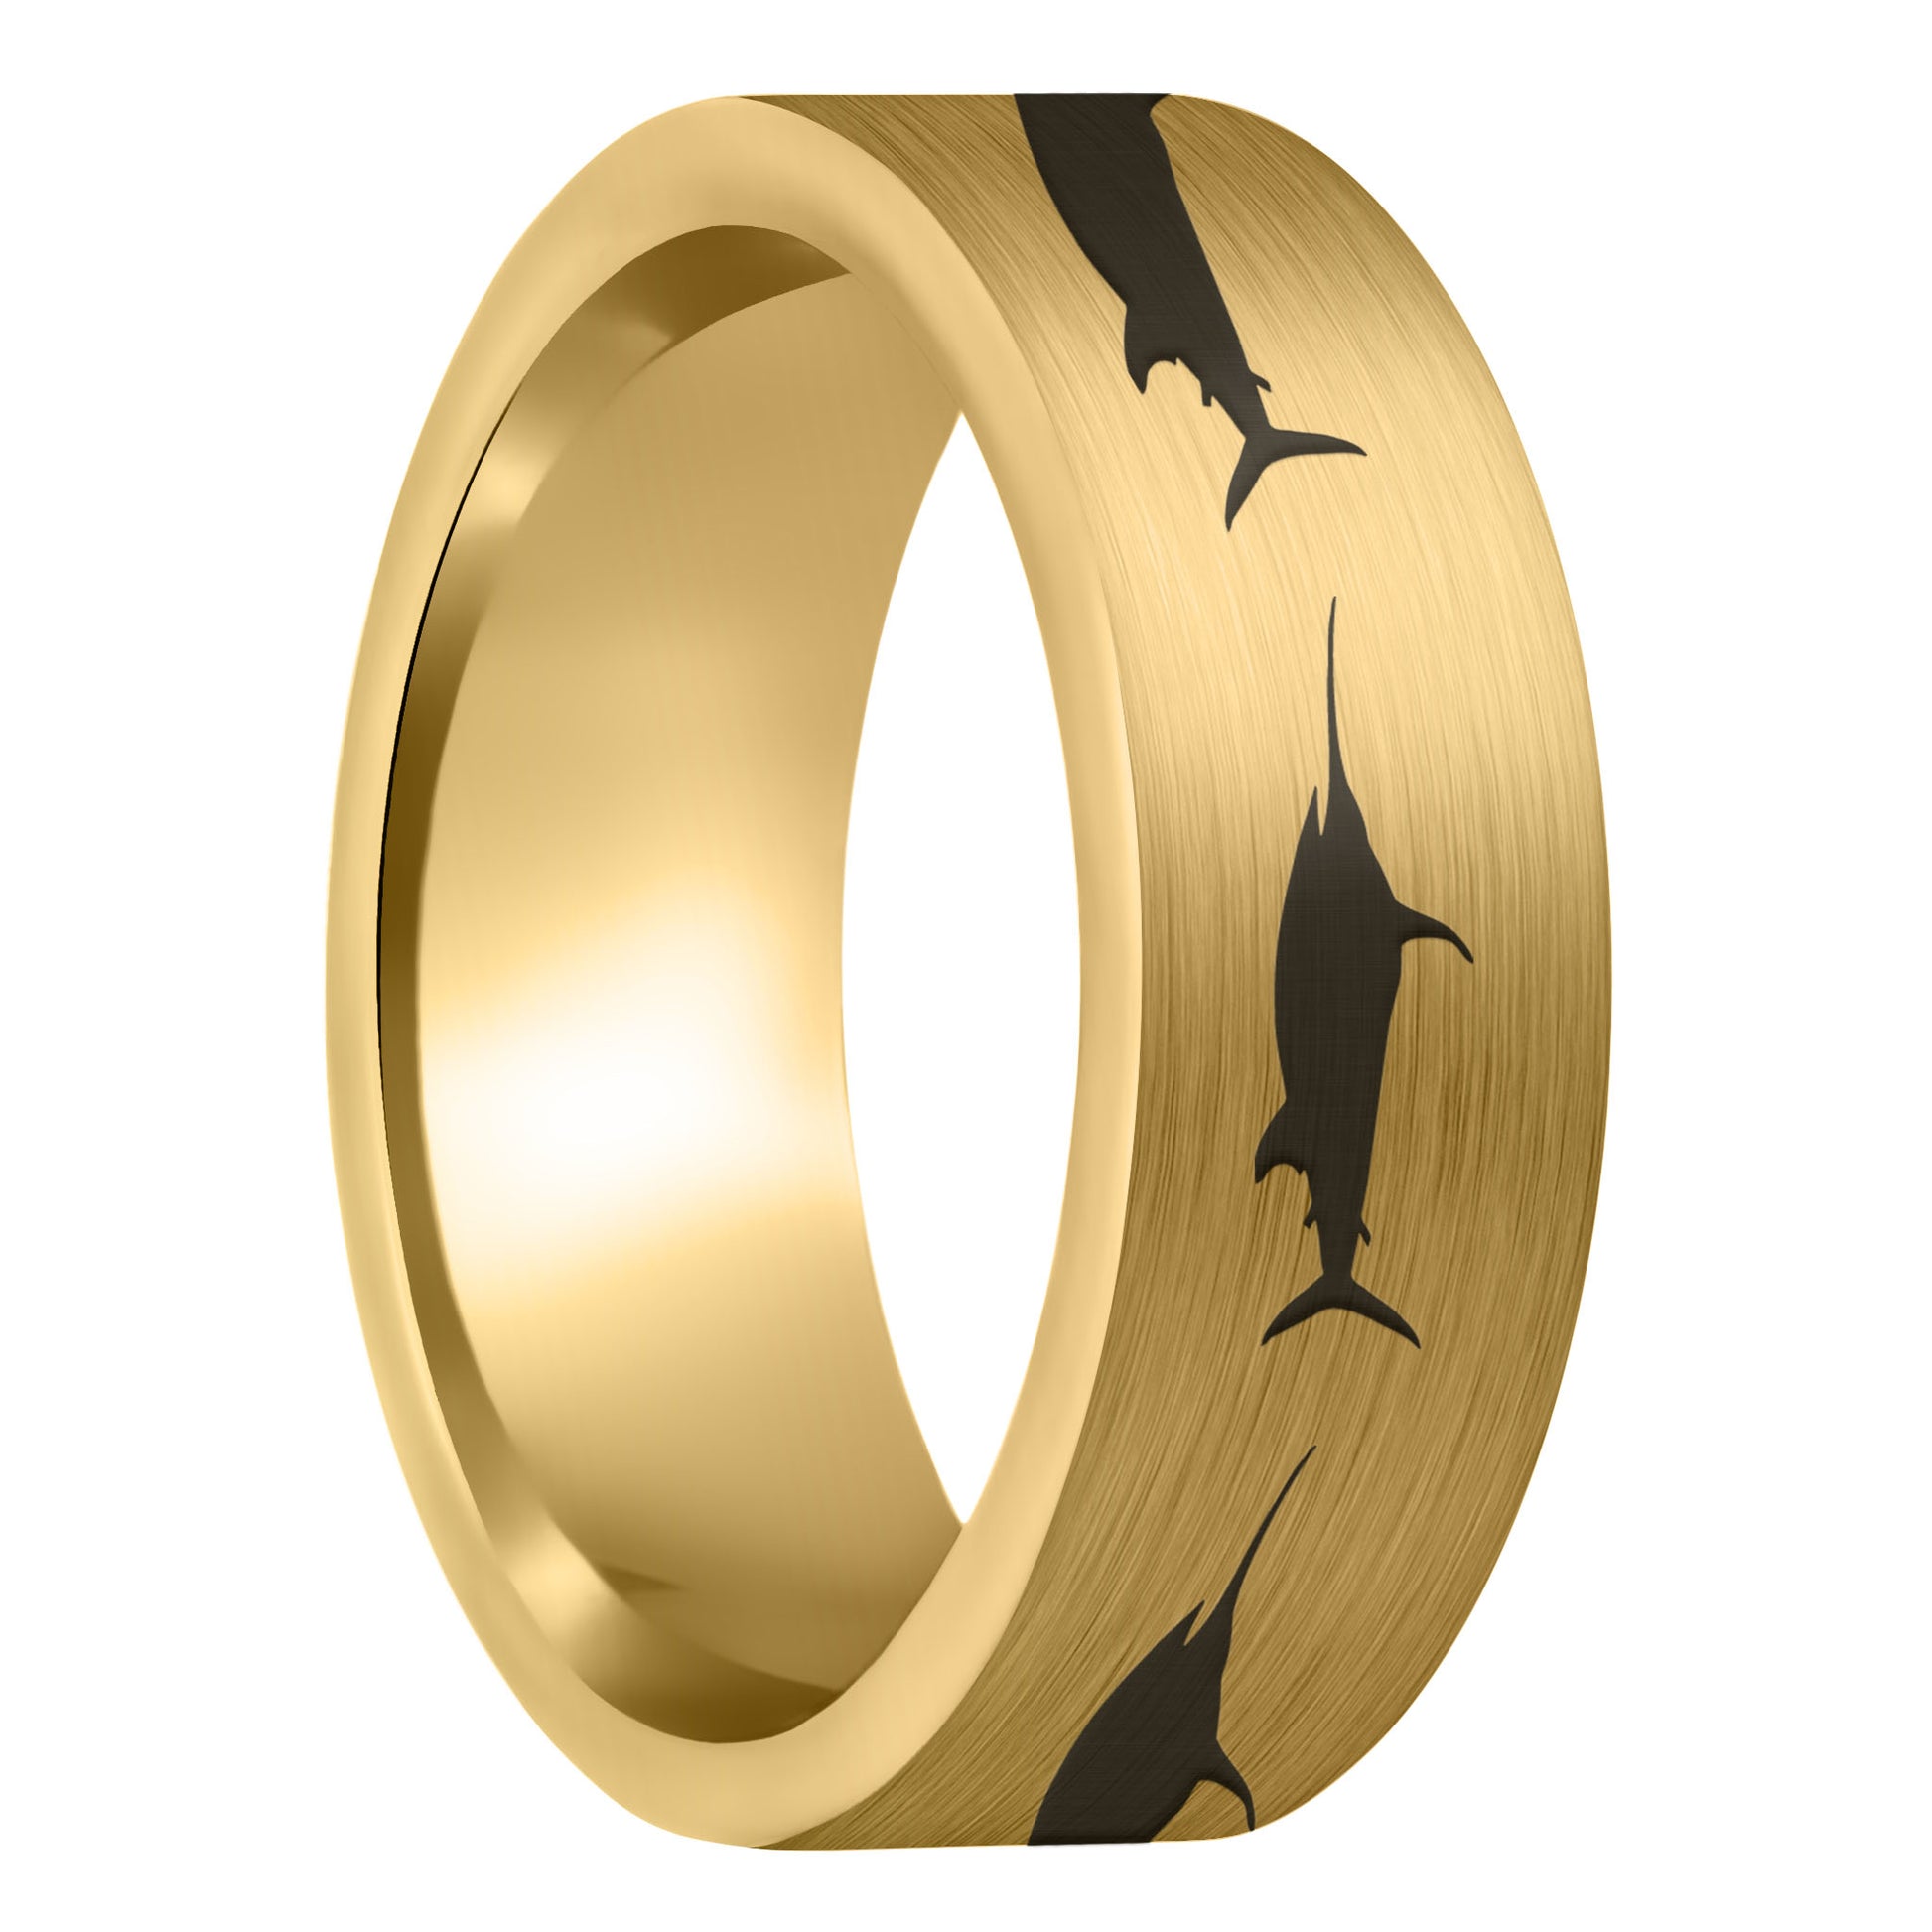 A swordfish brushed gold tungsten men's wedding band displayed on a plain white background.